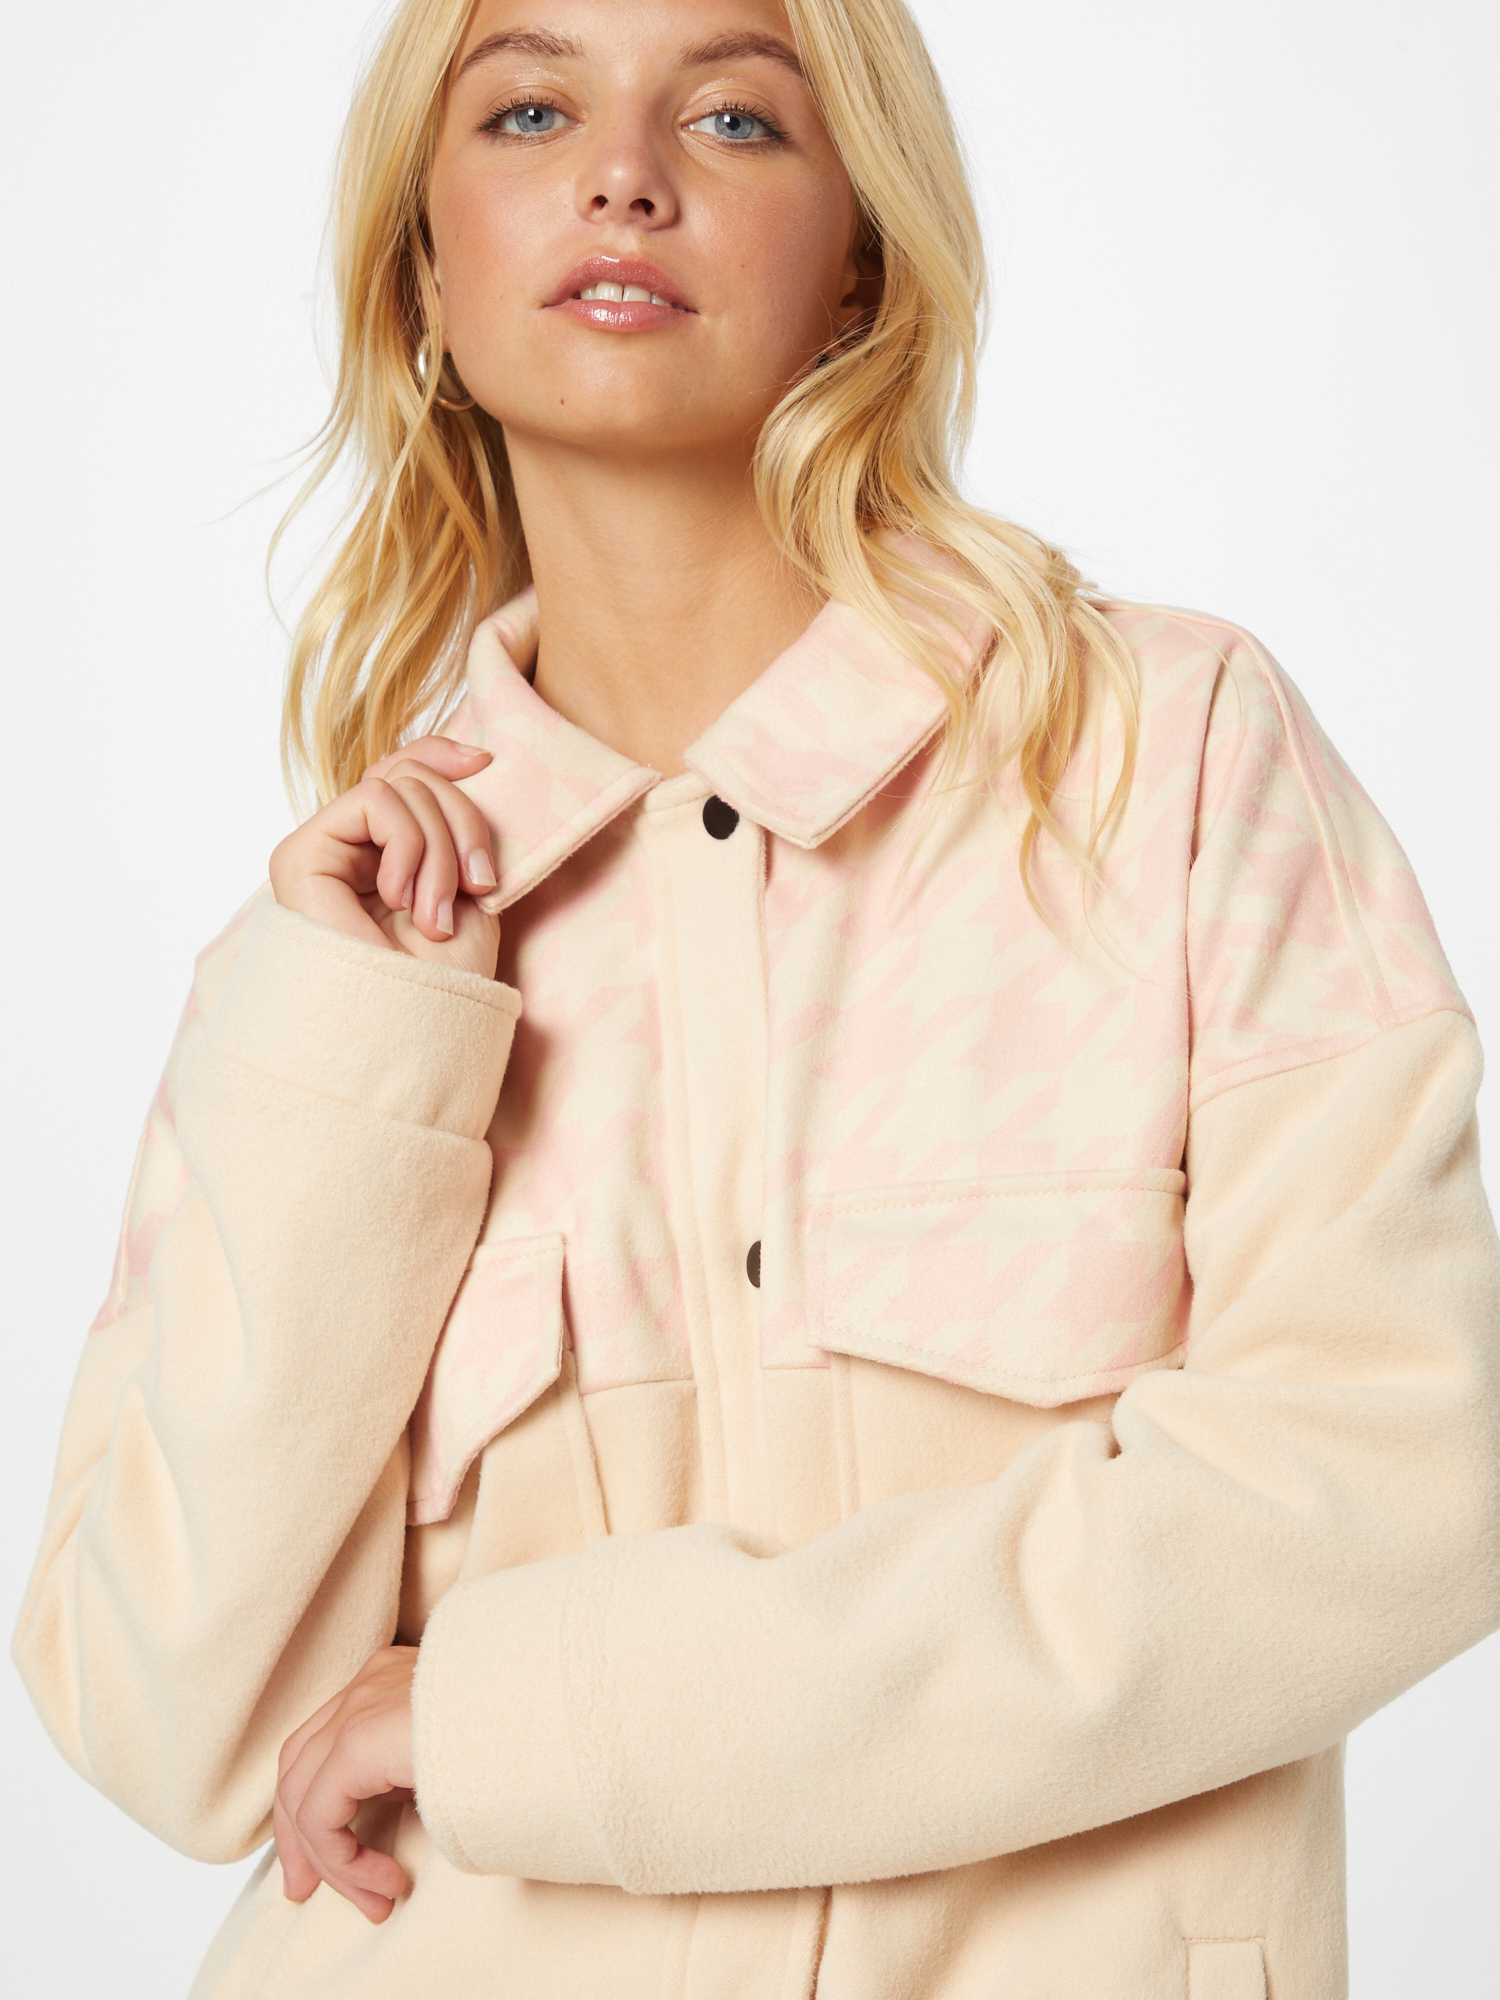 Missguided Jacke HOUNDSTOOTH in Sand 